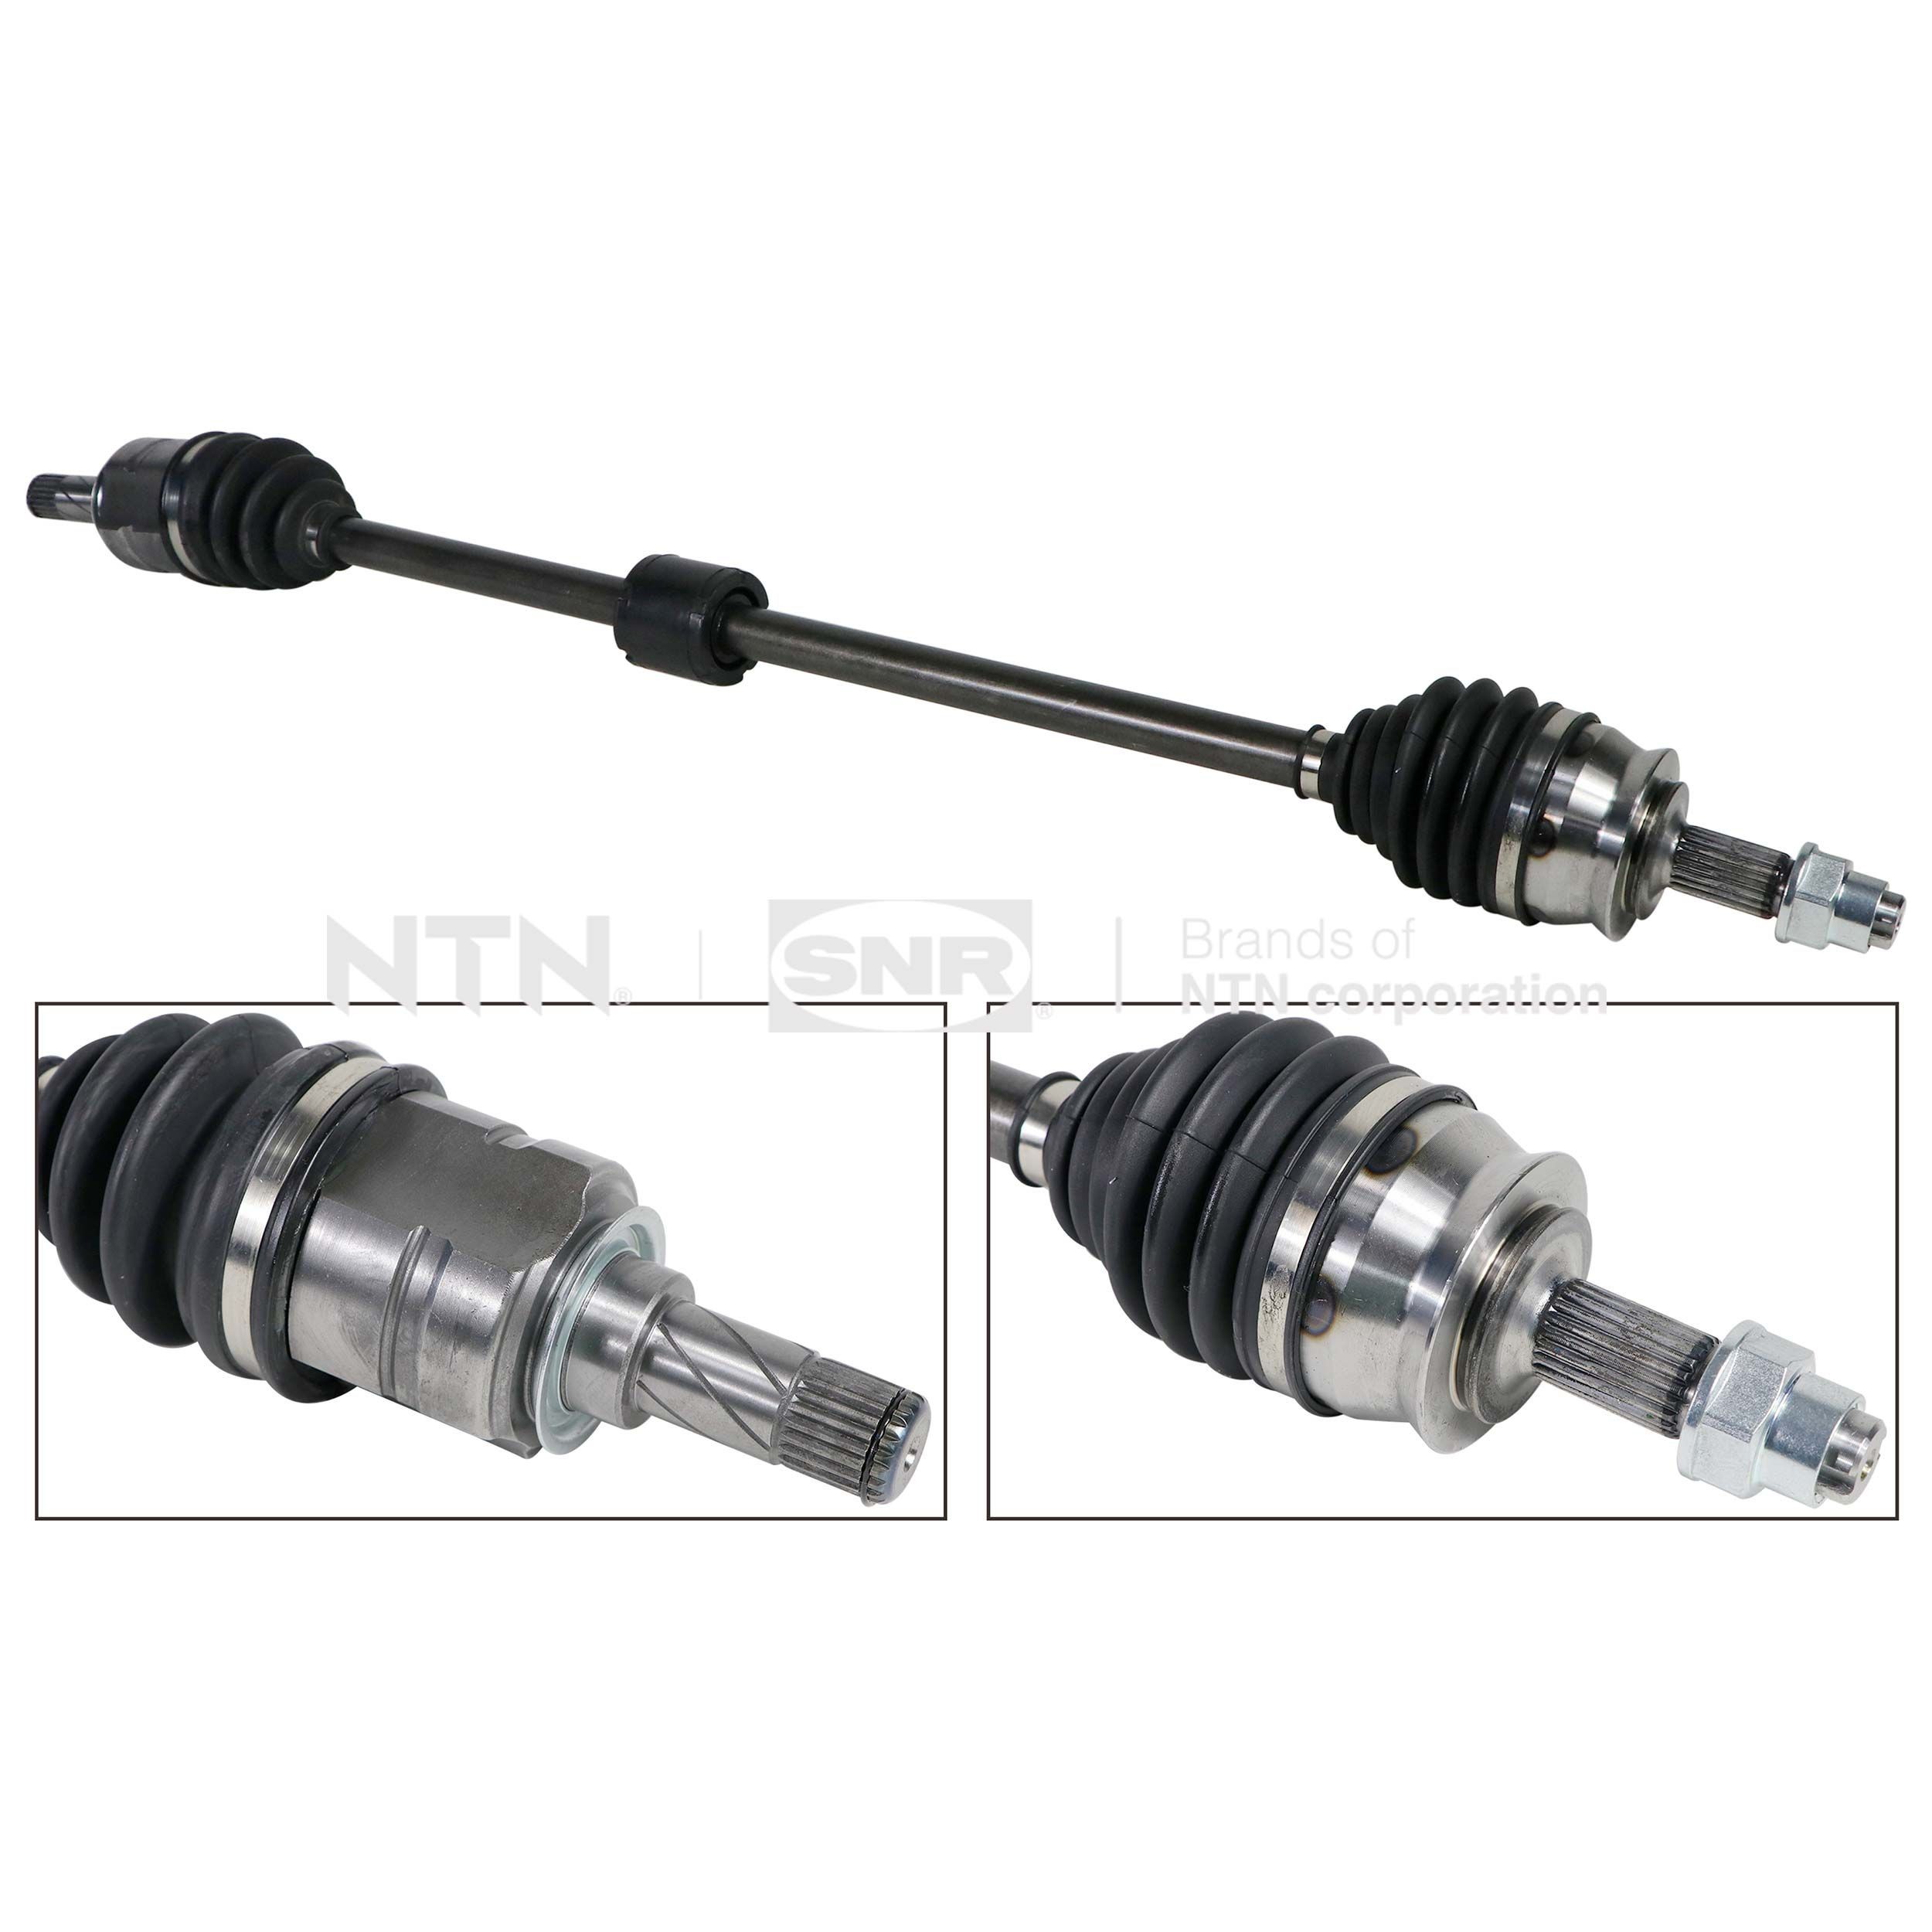 SNR Front Axle Right, 918mm Length: 918mm, External Toothing wheel side: 22 Driveshaft DK53.026 buy